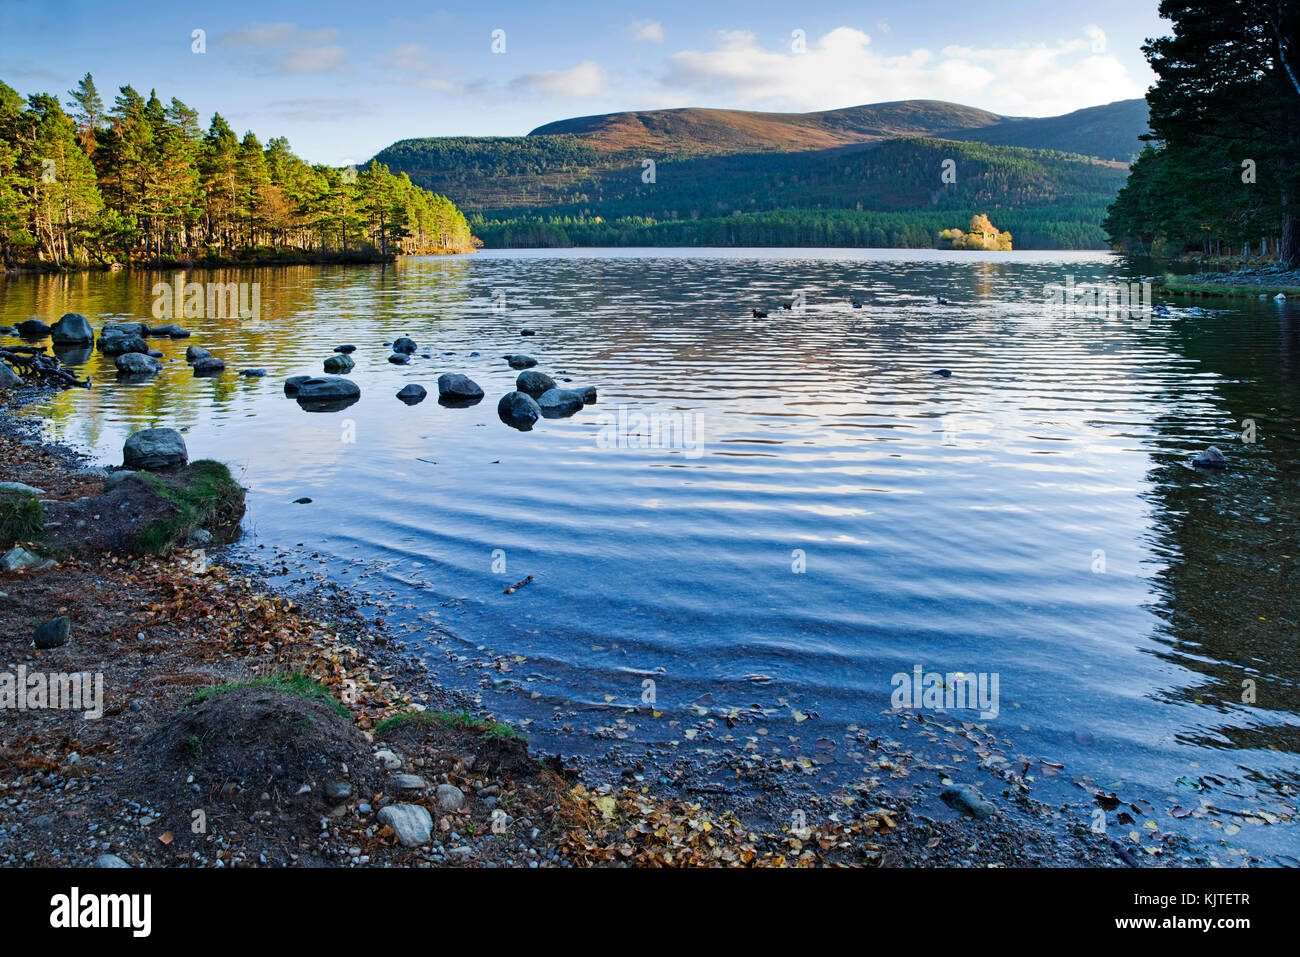 Loch an Eilein, Rothiemurchus, Cairngorms, Scottish Highlands, autumn, the island with ruined castle in the distance lit up by sunlight. Stock Photo